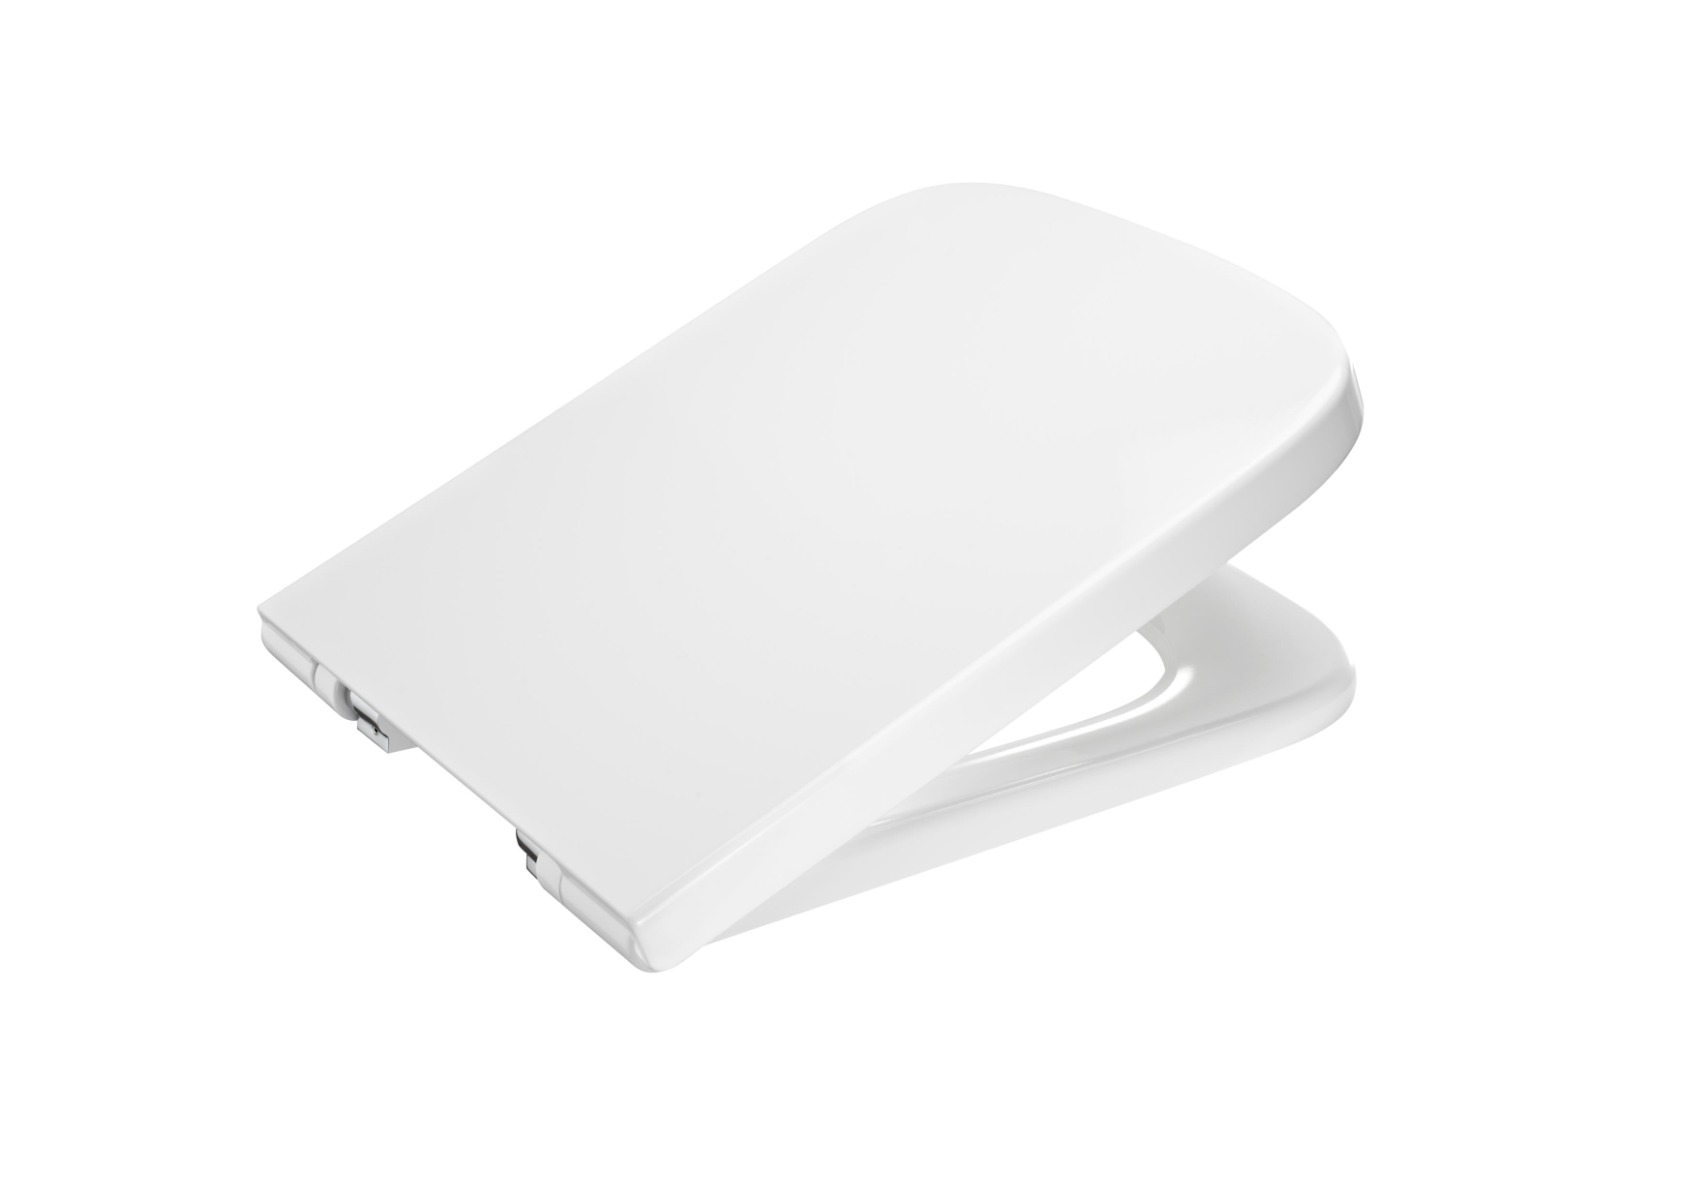 A801782004 Soft-closing lacquered toilet seat and cover